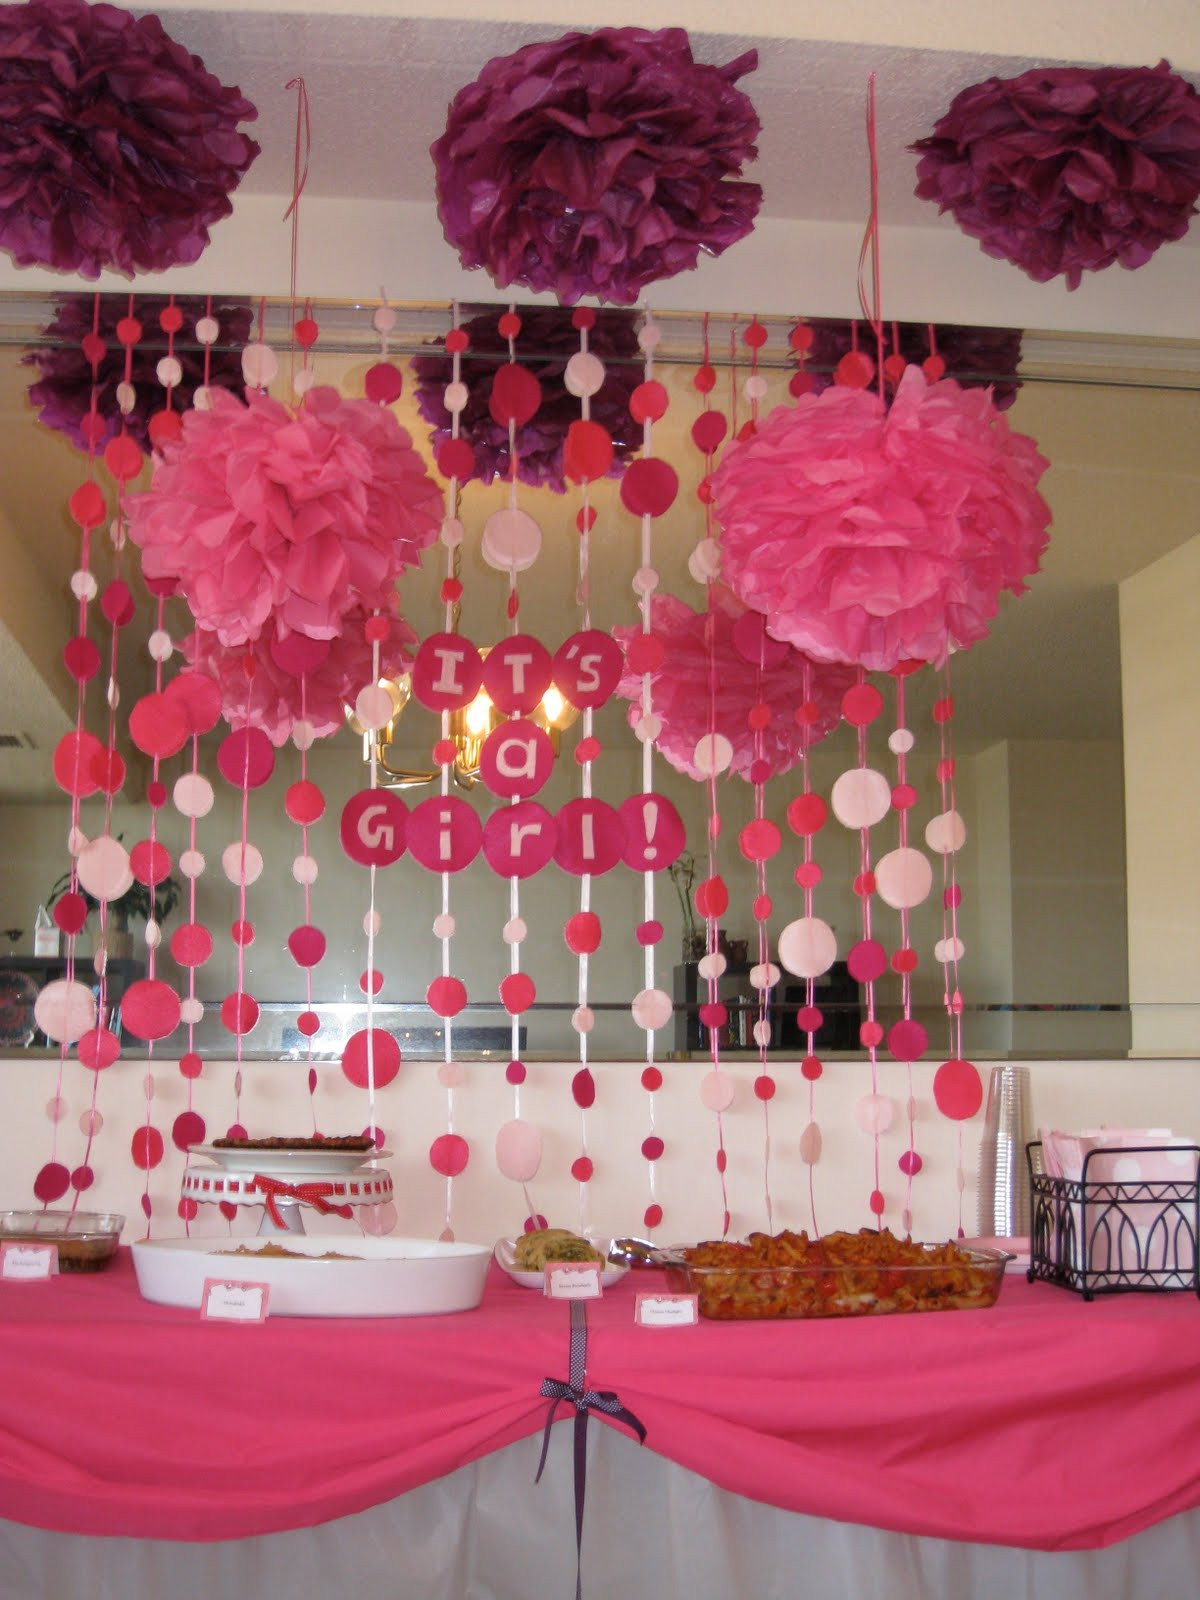 Baby Shower Decorations Ideas For A Girl
 Baby Shower Themes Ideas For Baby Boy And Baby Girl